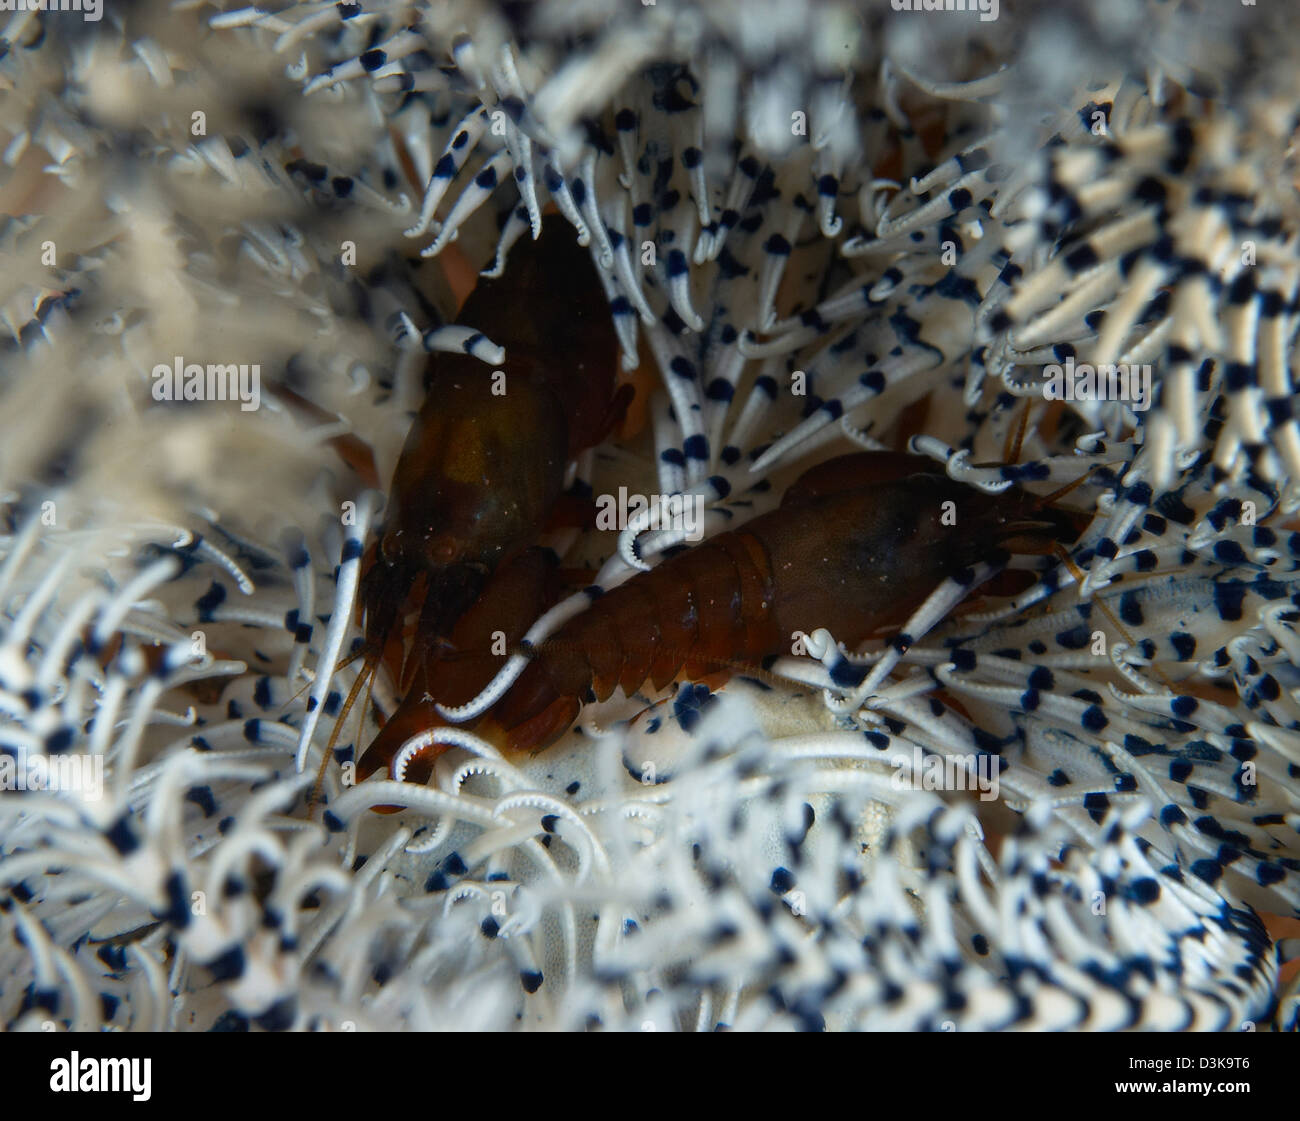 Pair of brown snapping shrimps on white and blue crinoid, Bali, Indonesia. Stock Photo